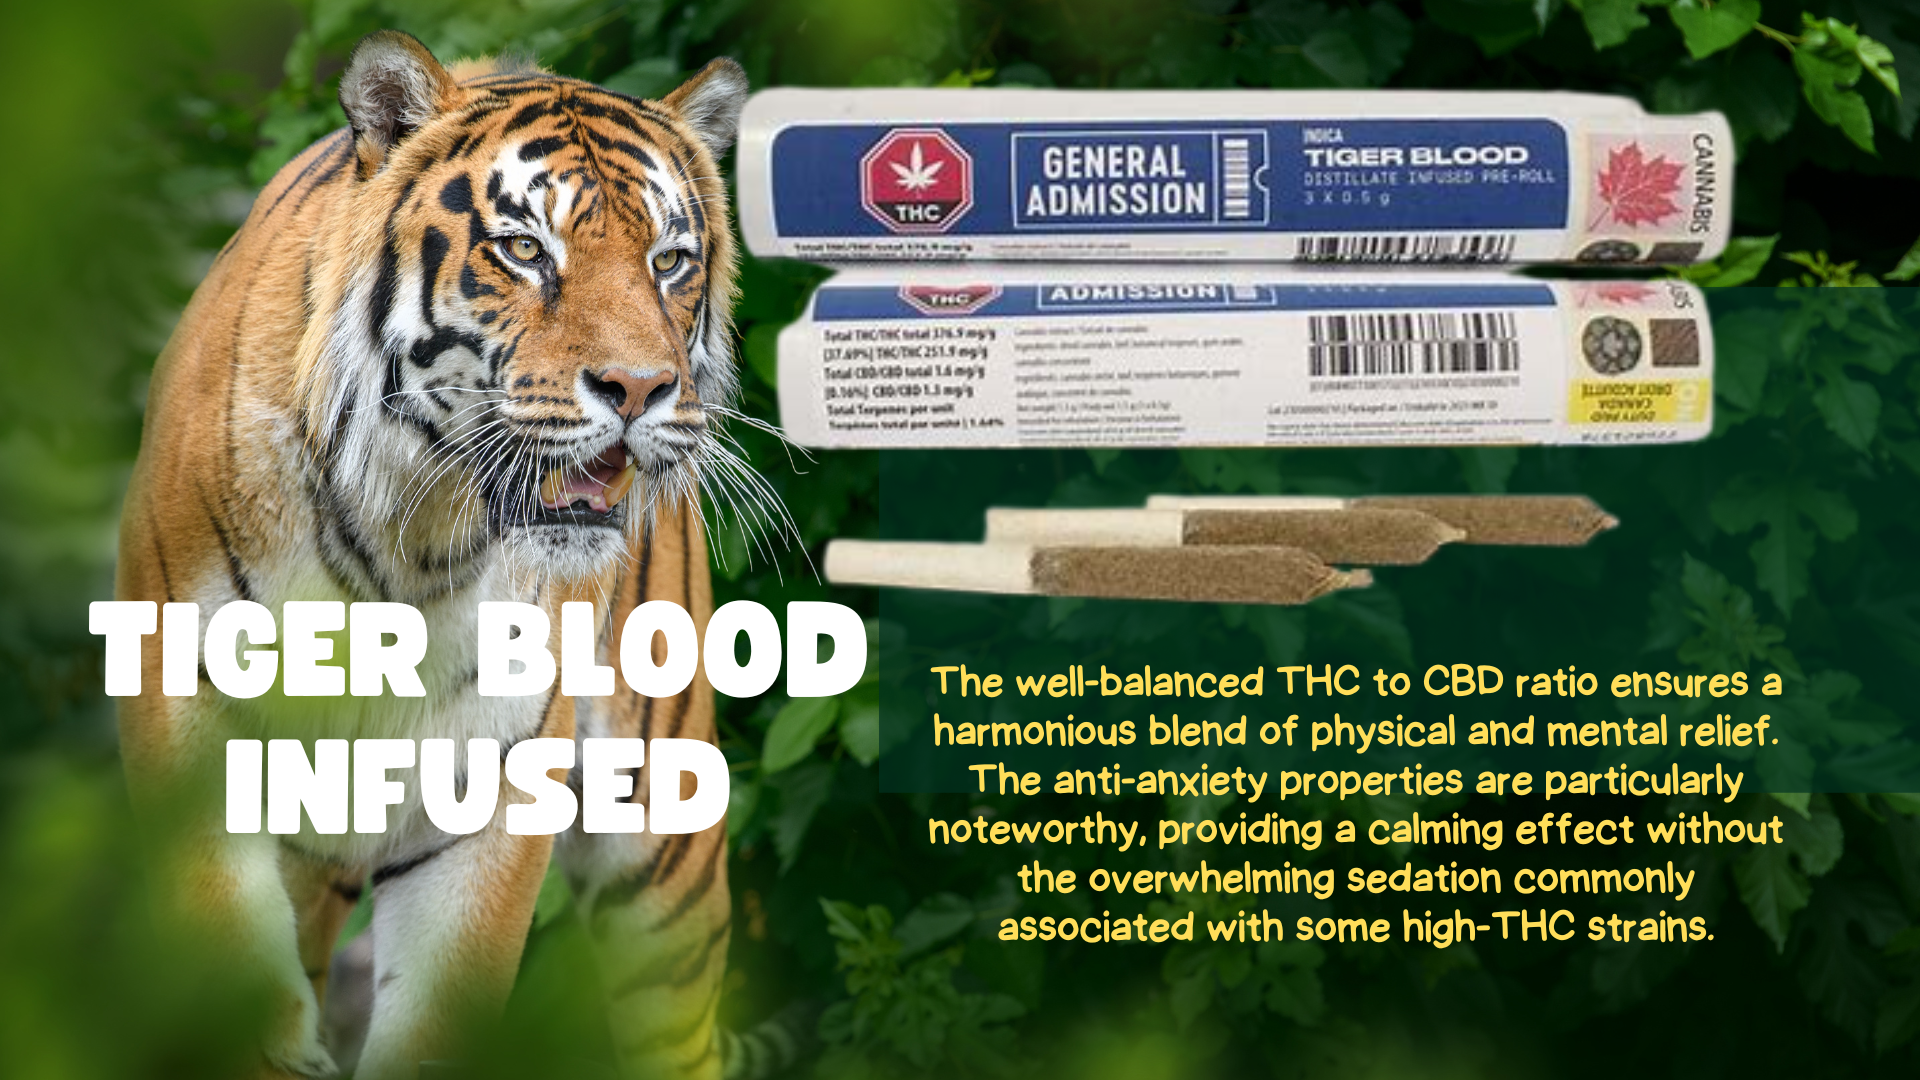 Tiger Blood Infused by General Admission: A Preroll Powerhouse